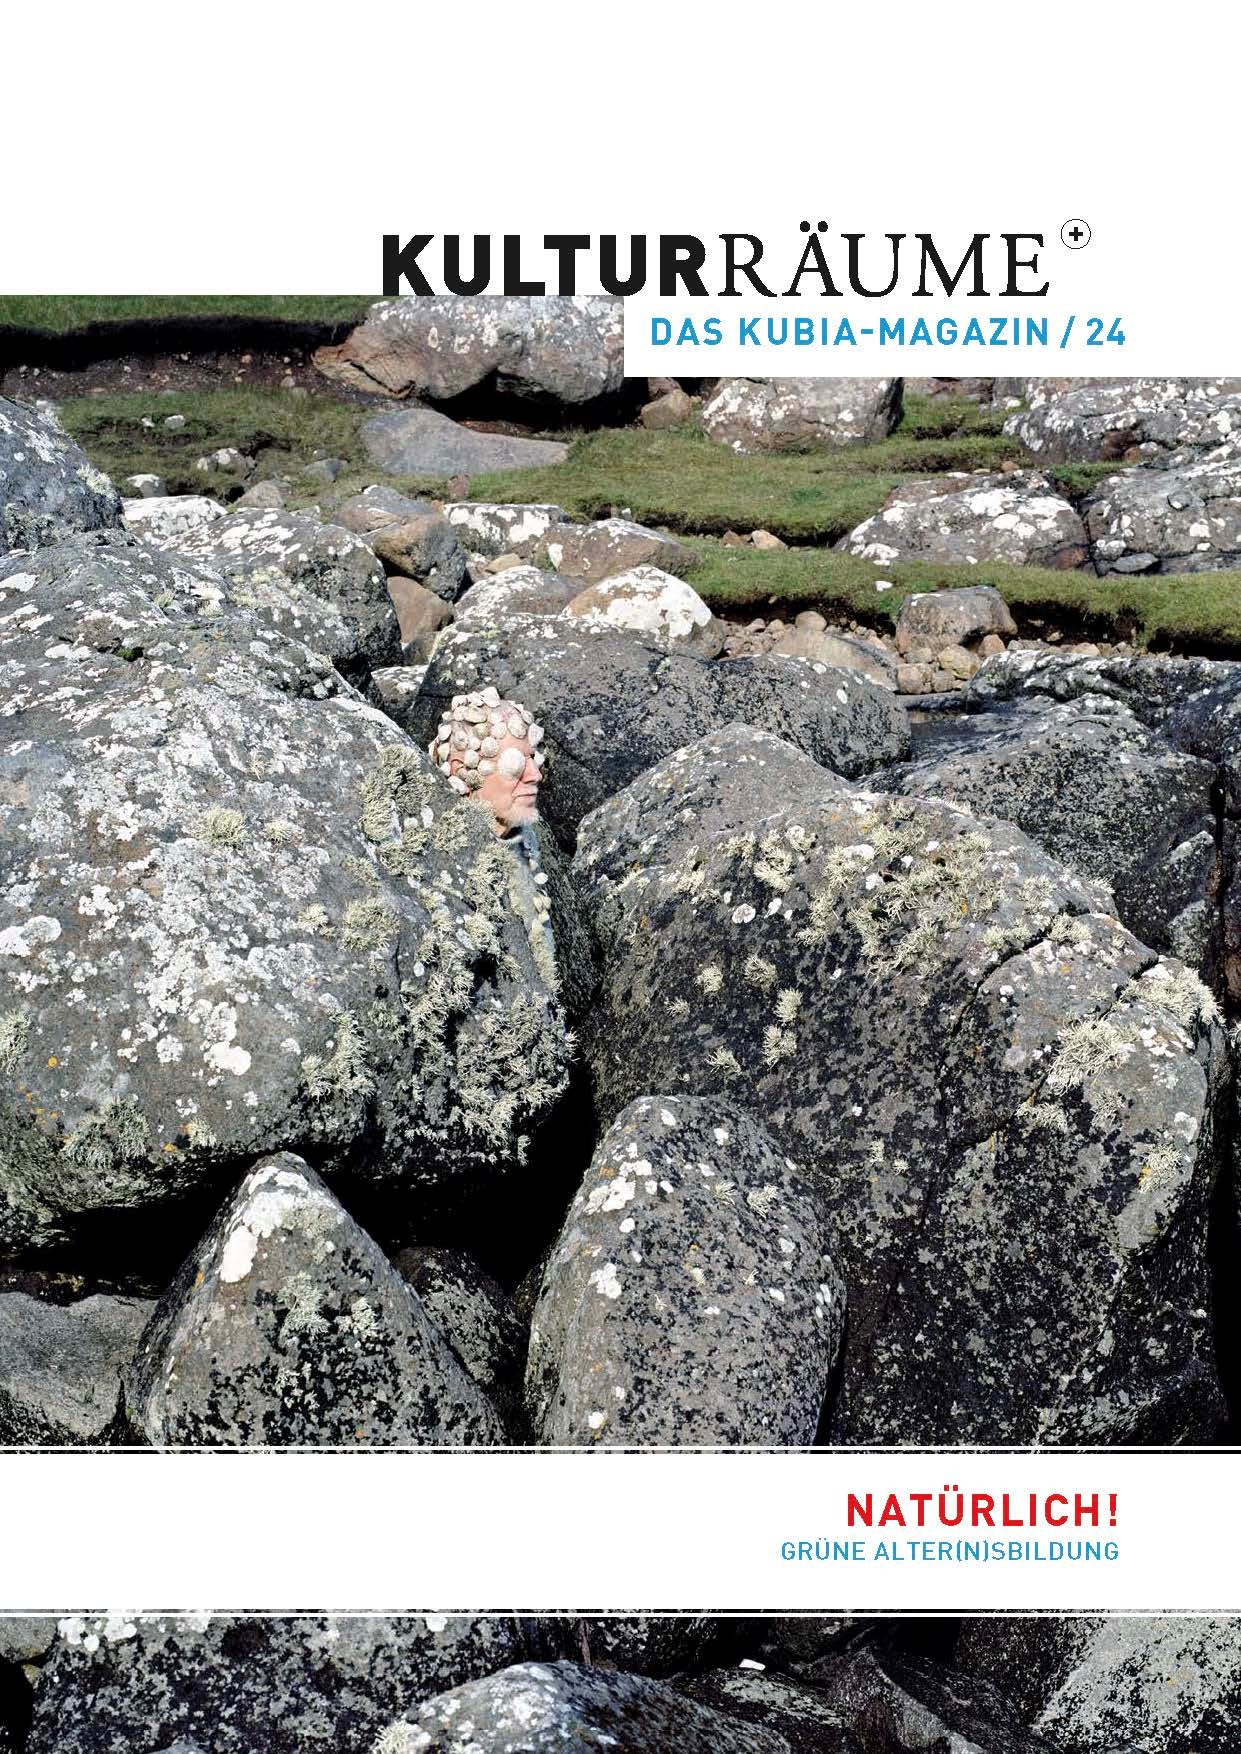 Cover Kulturräume+ 24/2023. photo by Riitta Ikonen and Karoline Hjorth from the series "Eyes as Big as Plates" with the face of an old man seemingly covered with shells, making him part of the rocky landscape surrounding him.